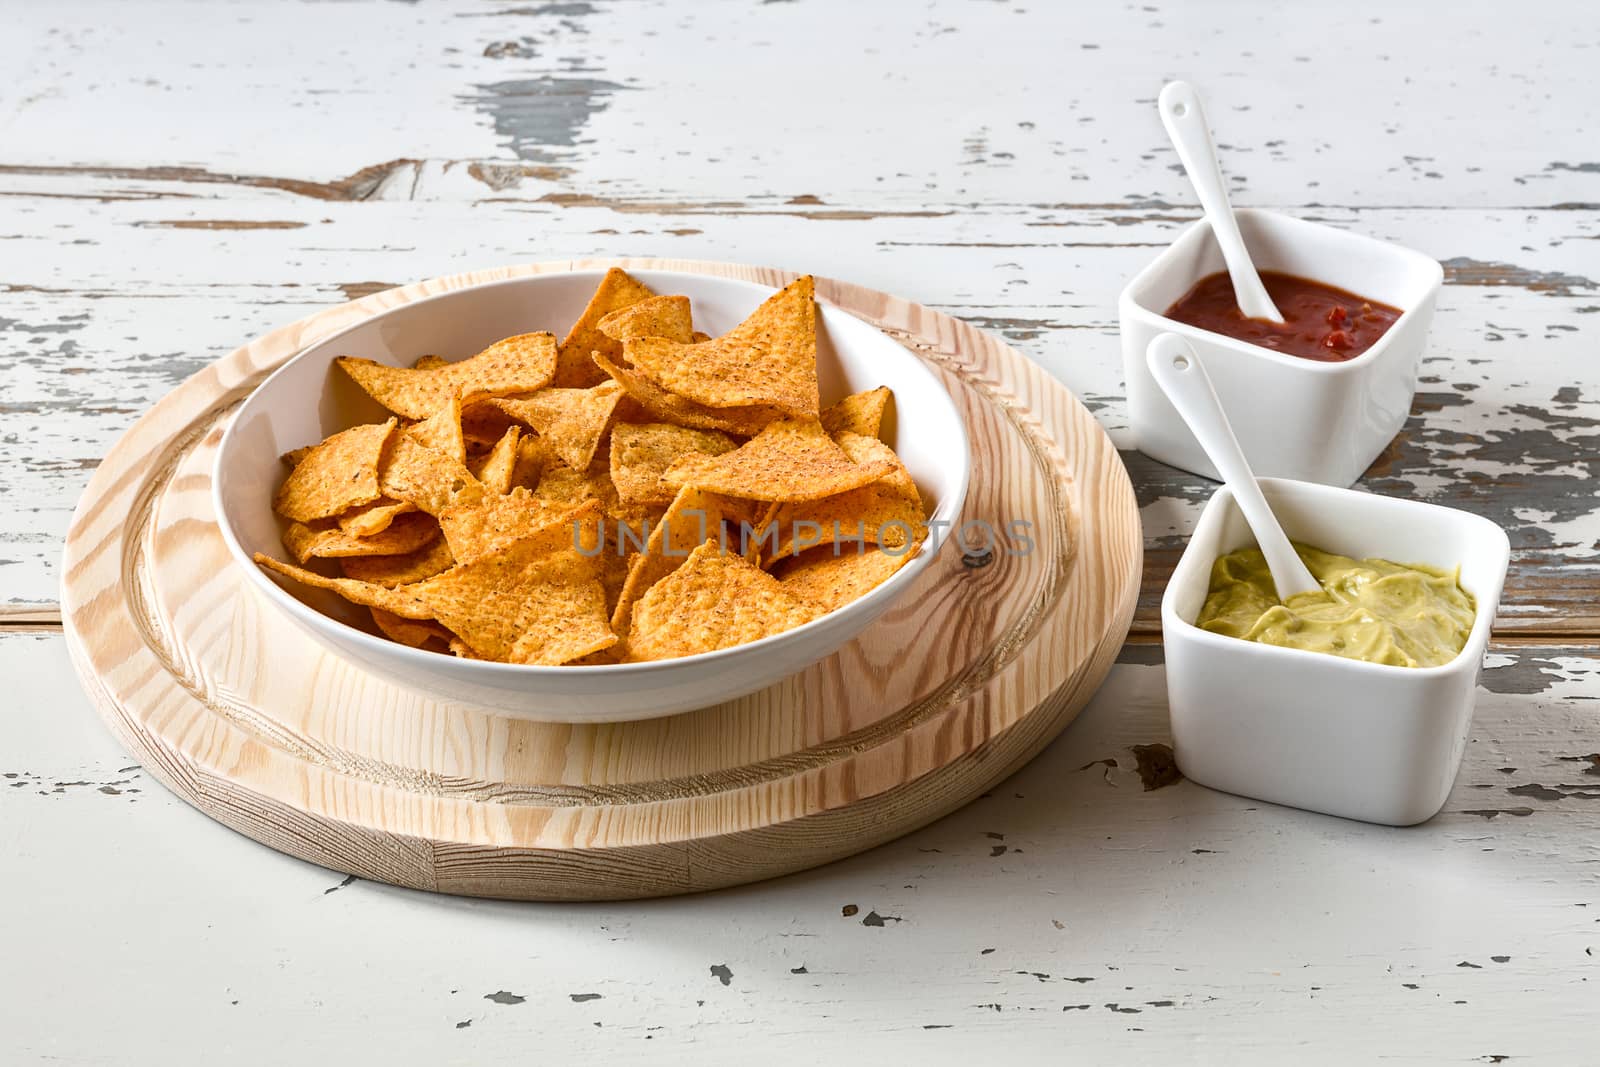 Nachos chips in a white bowl over a chopping board with sauces on a wood background